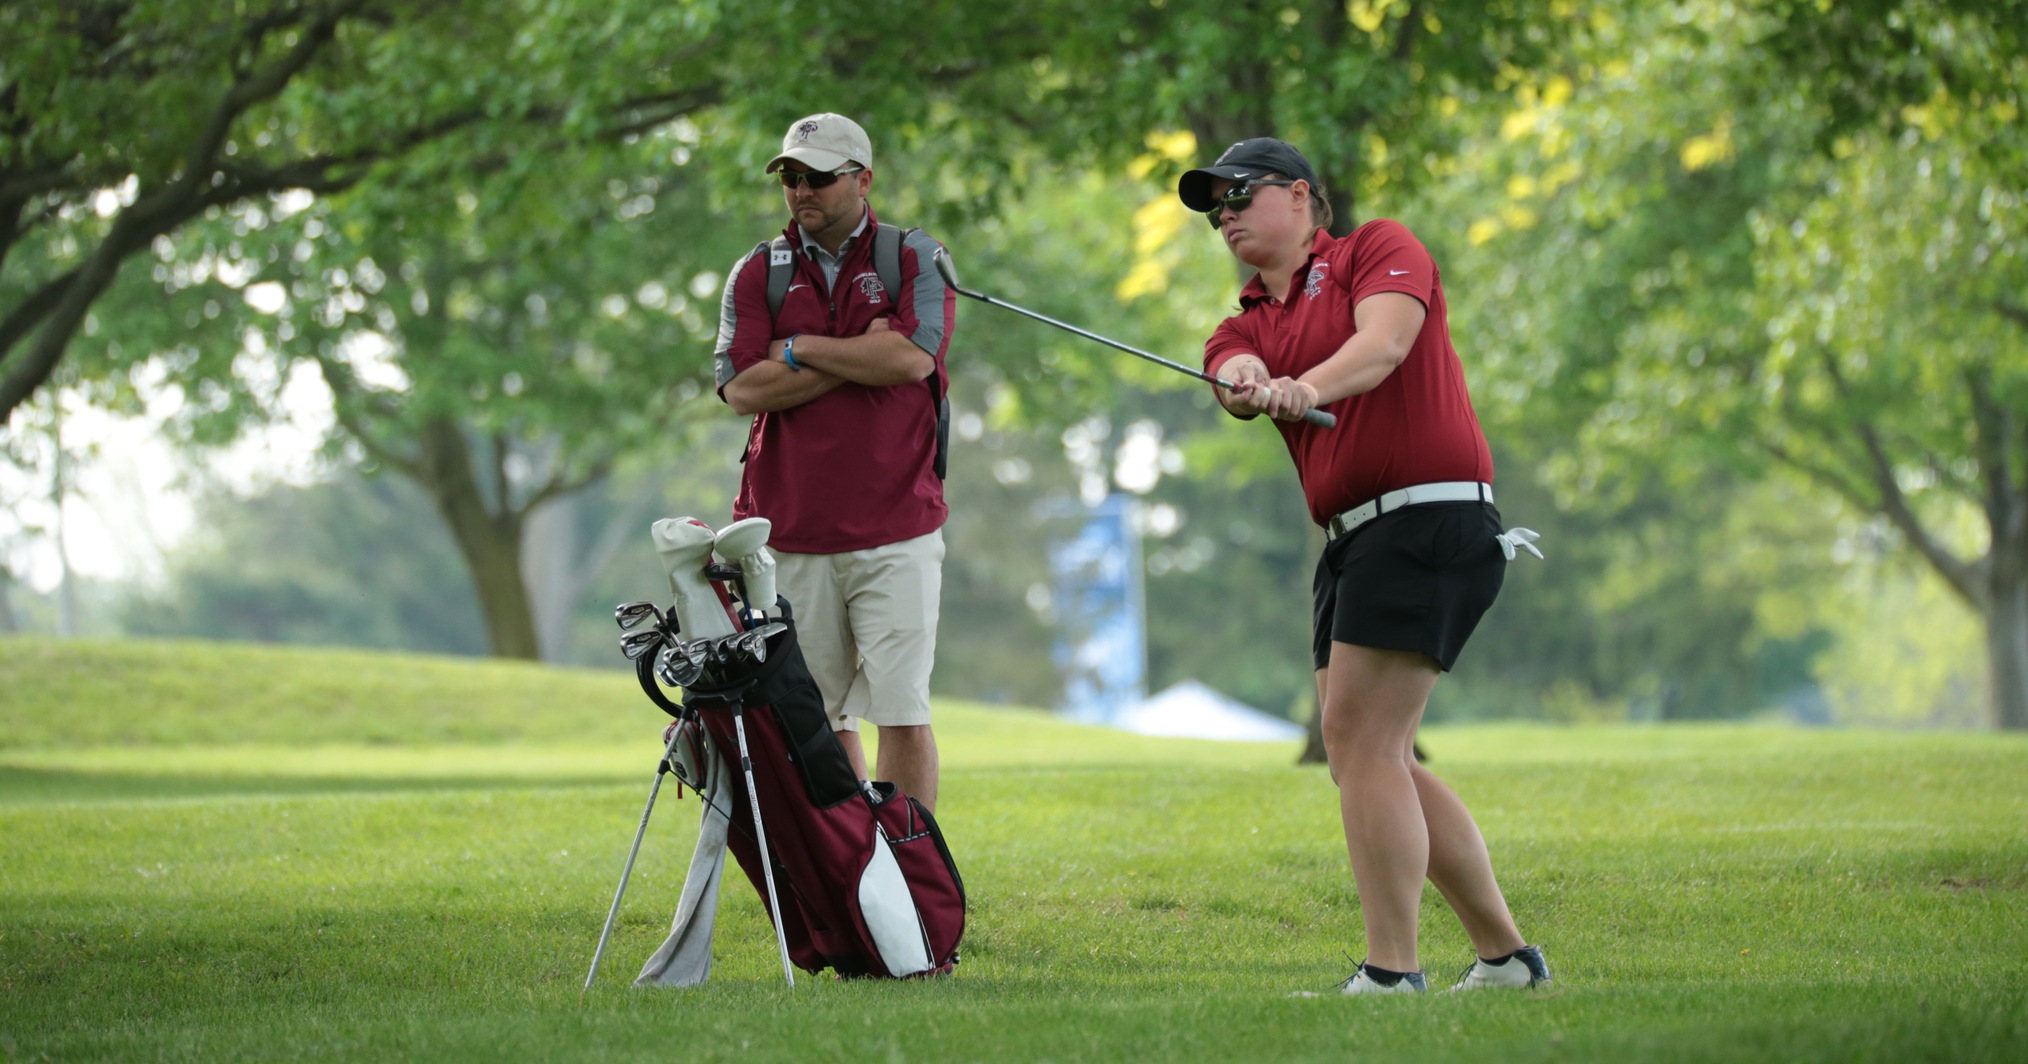 Morrison Arrives Back in Ohio, Golfs at First Day of Nationals